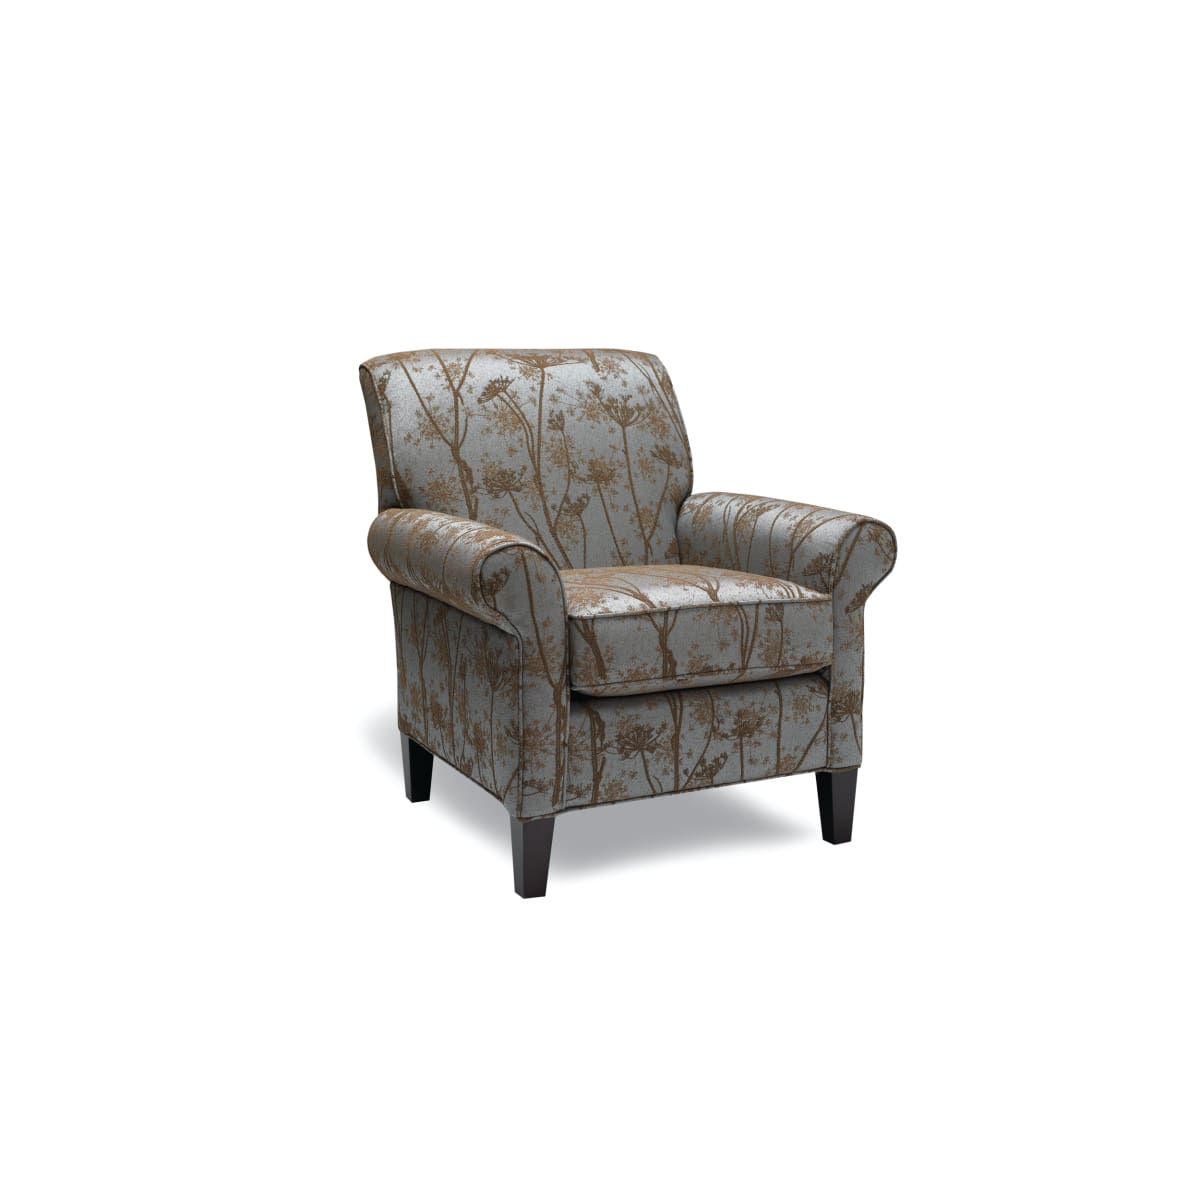 Maui Accent Chair - 37x35x33 - accent chairs